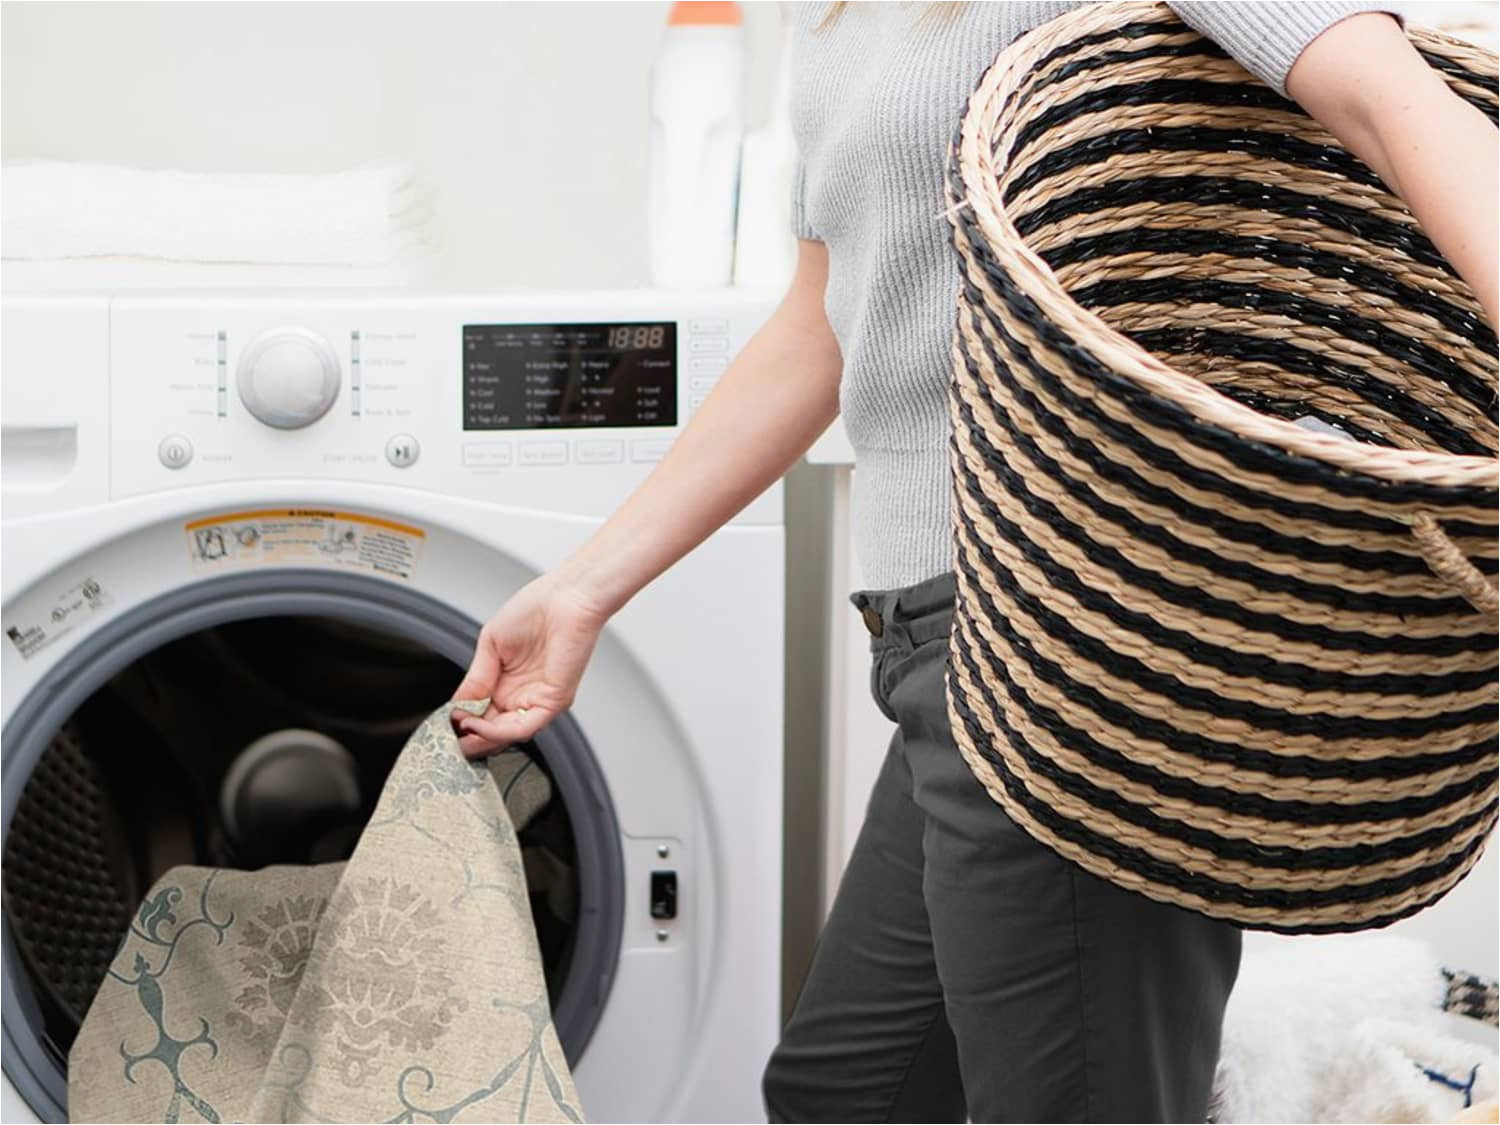 Wash area Rug In Washing Machine Can You Clean A Rug In the Washing Machine? You Can Wash these and …